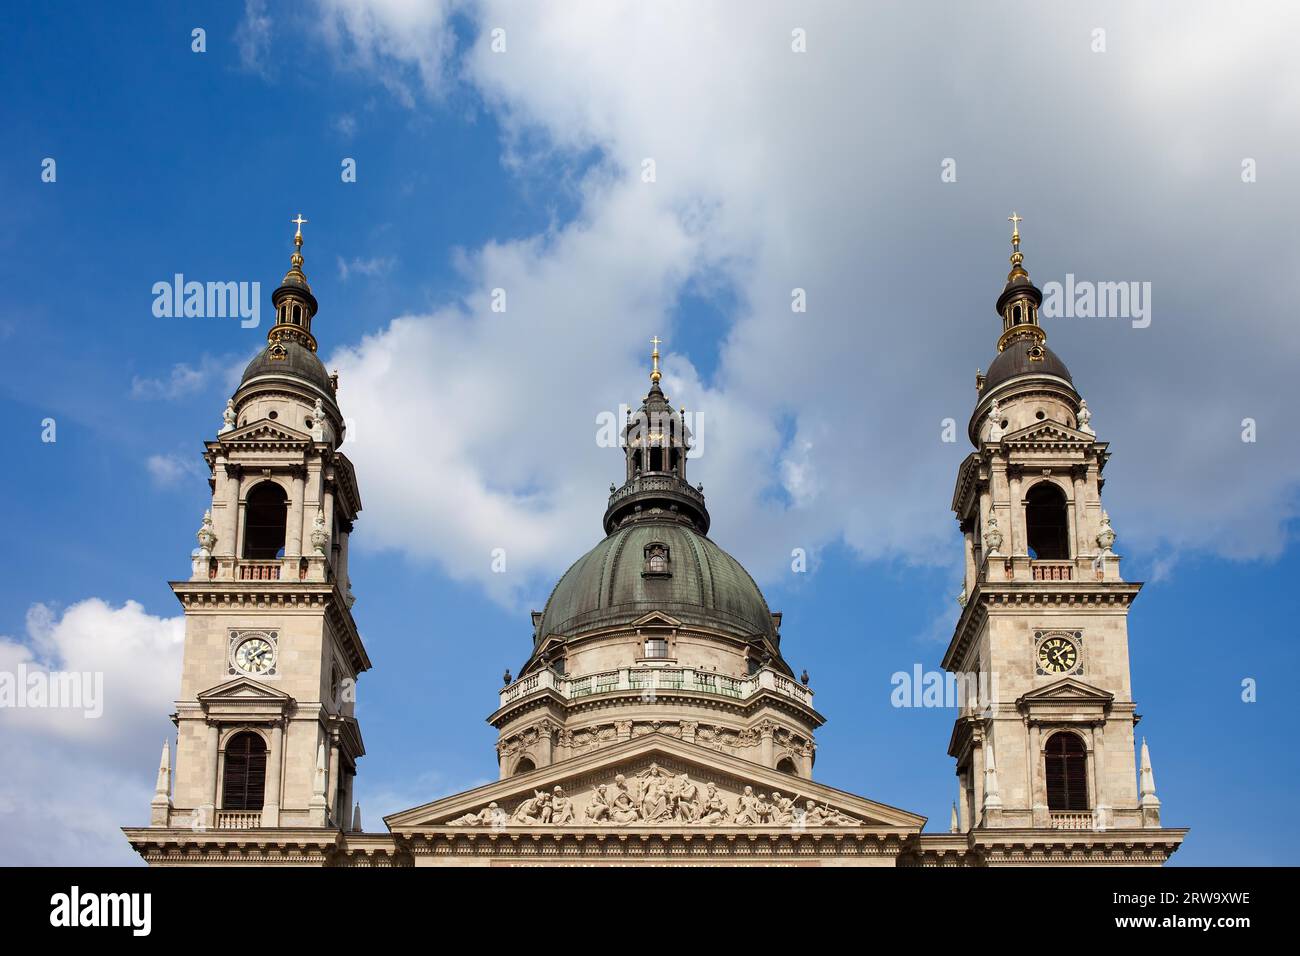 Dome, bell towers and pediment of the Neoclassical St. Stephen's Basilica in Budapest, Hungary Stock Photo